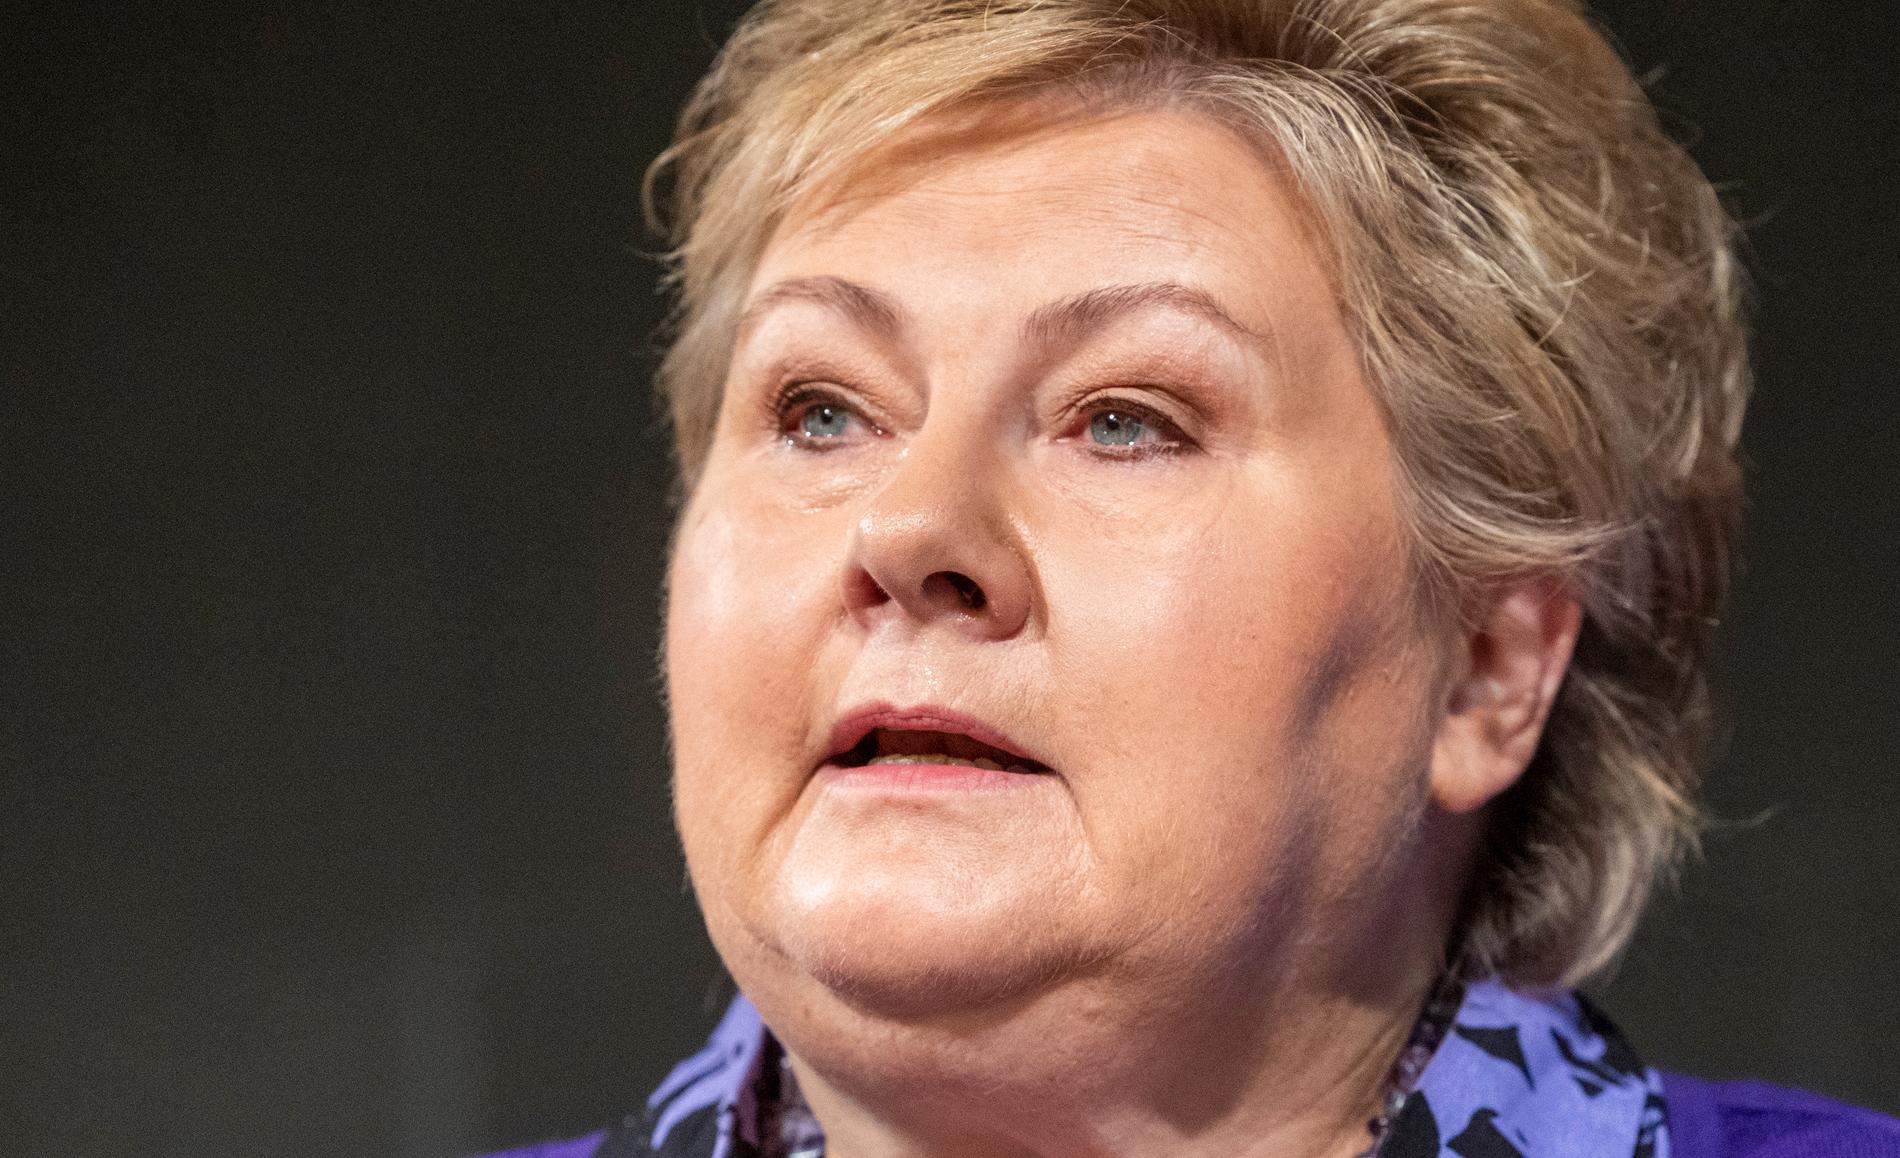 EXPLODING THE MAN'S LIES: Erna Solberg and the Conservative Party are fighting back against accusations of false gambling. 